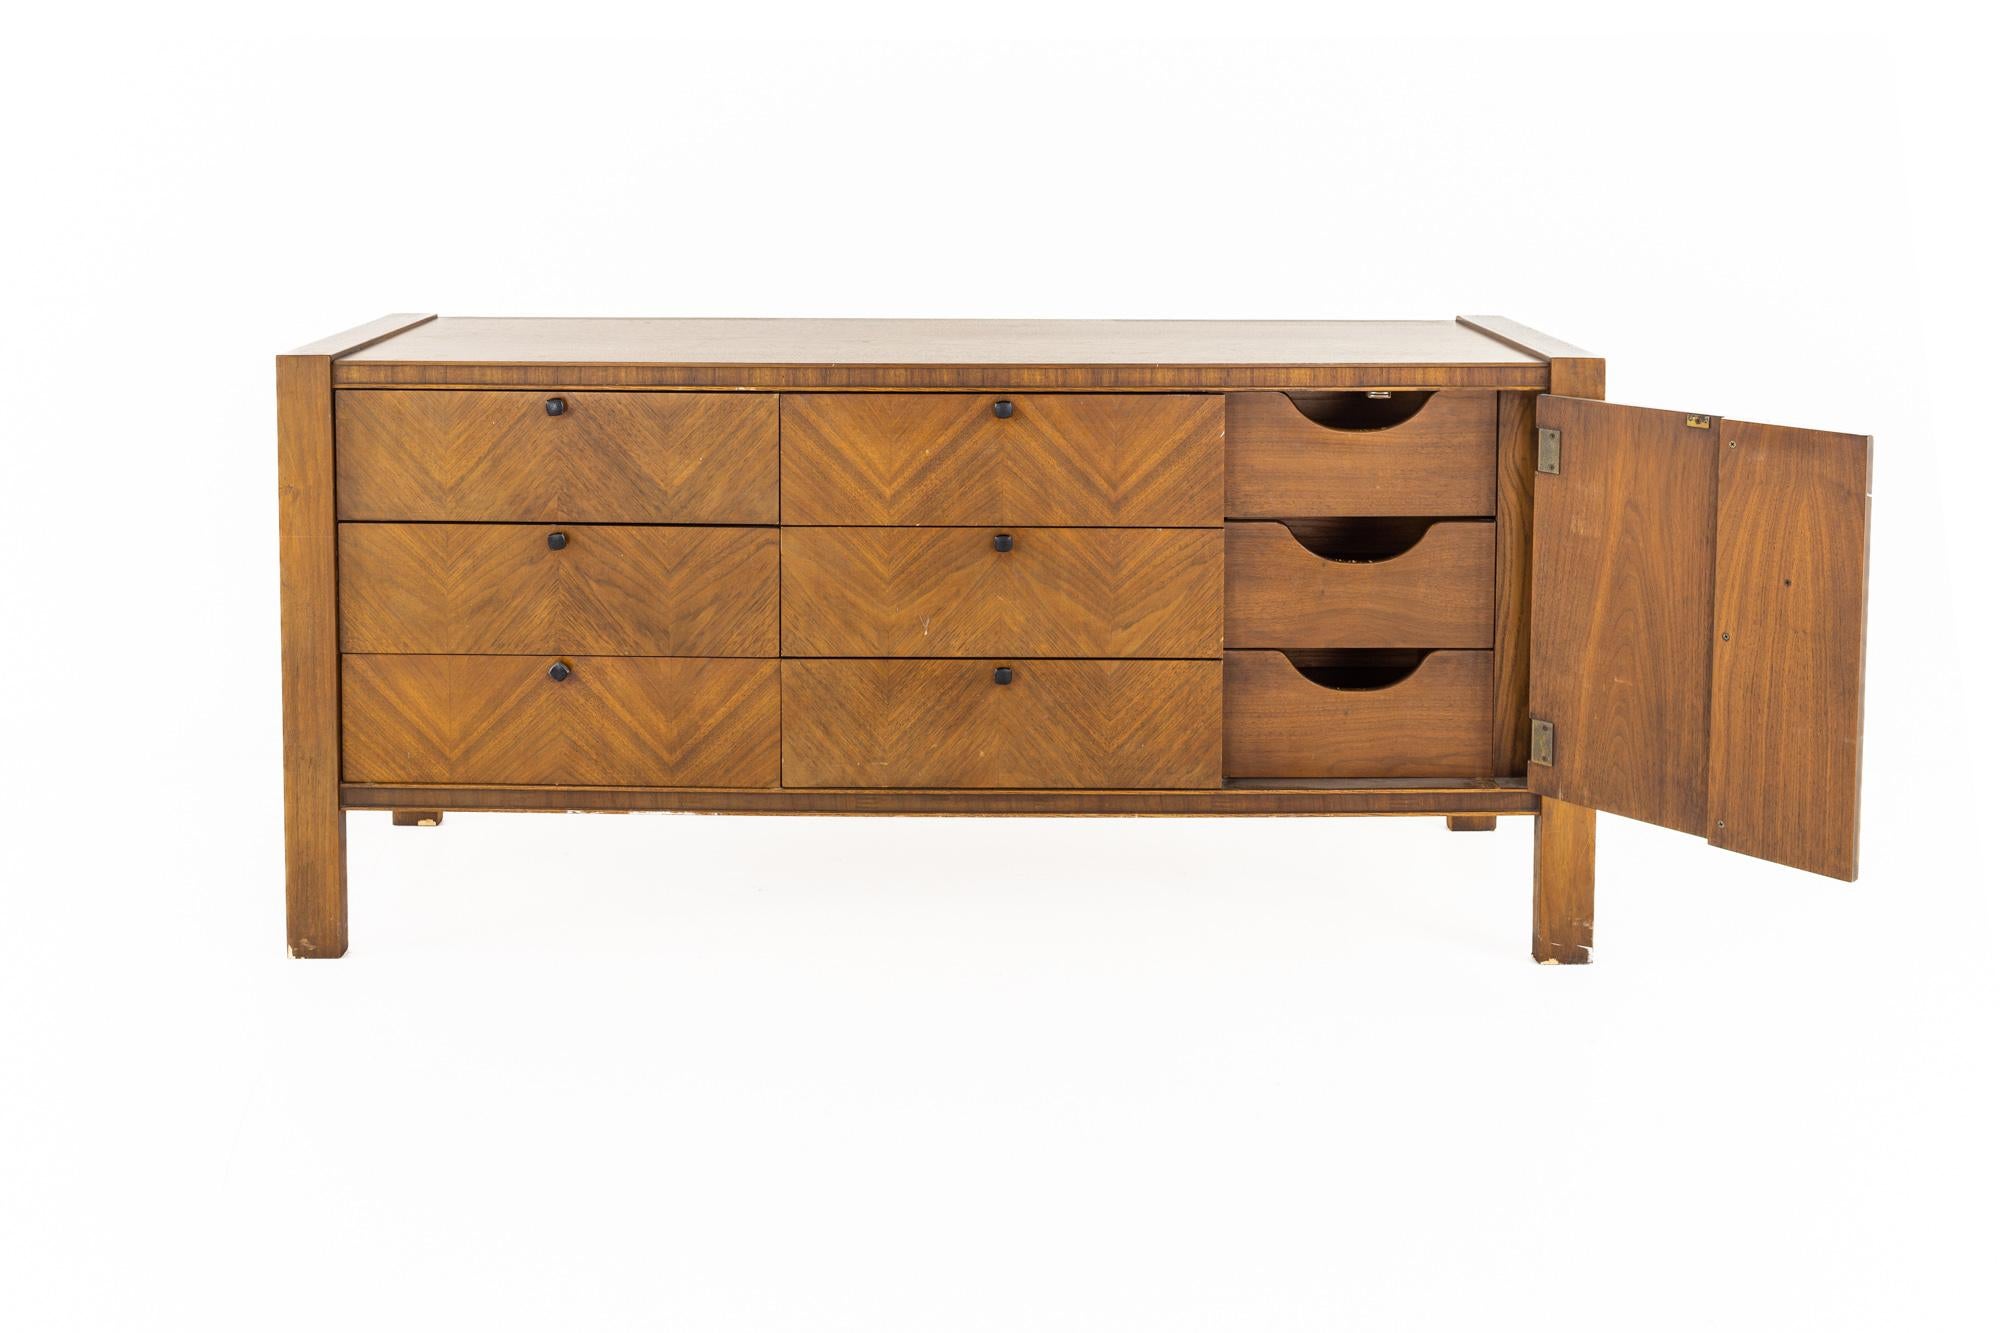 United Mid Century Tiki Walnut Lowboy Dresser In Good Condition For Sale In Countryside, IL